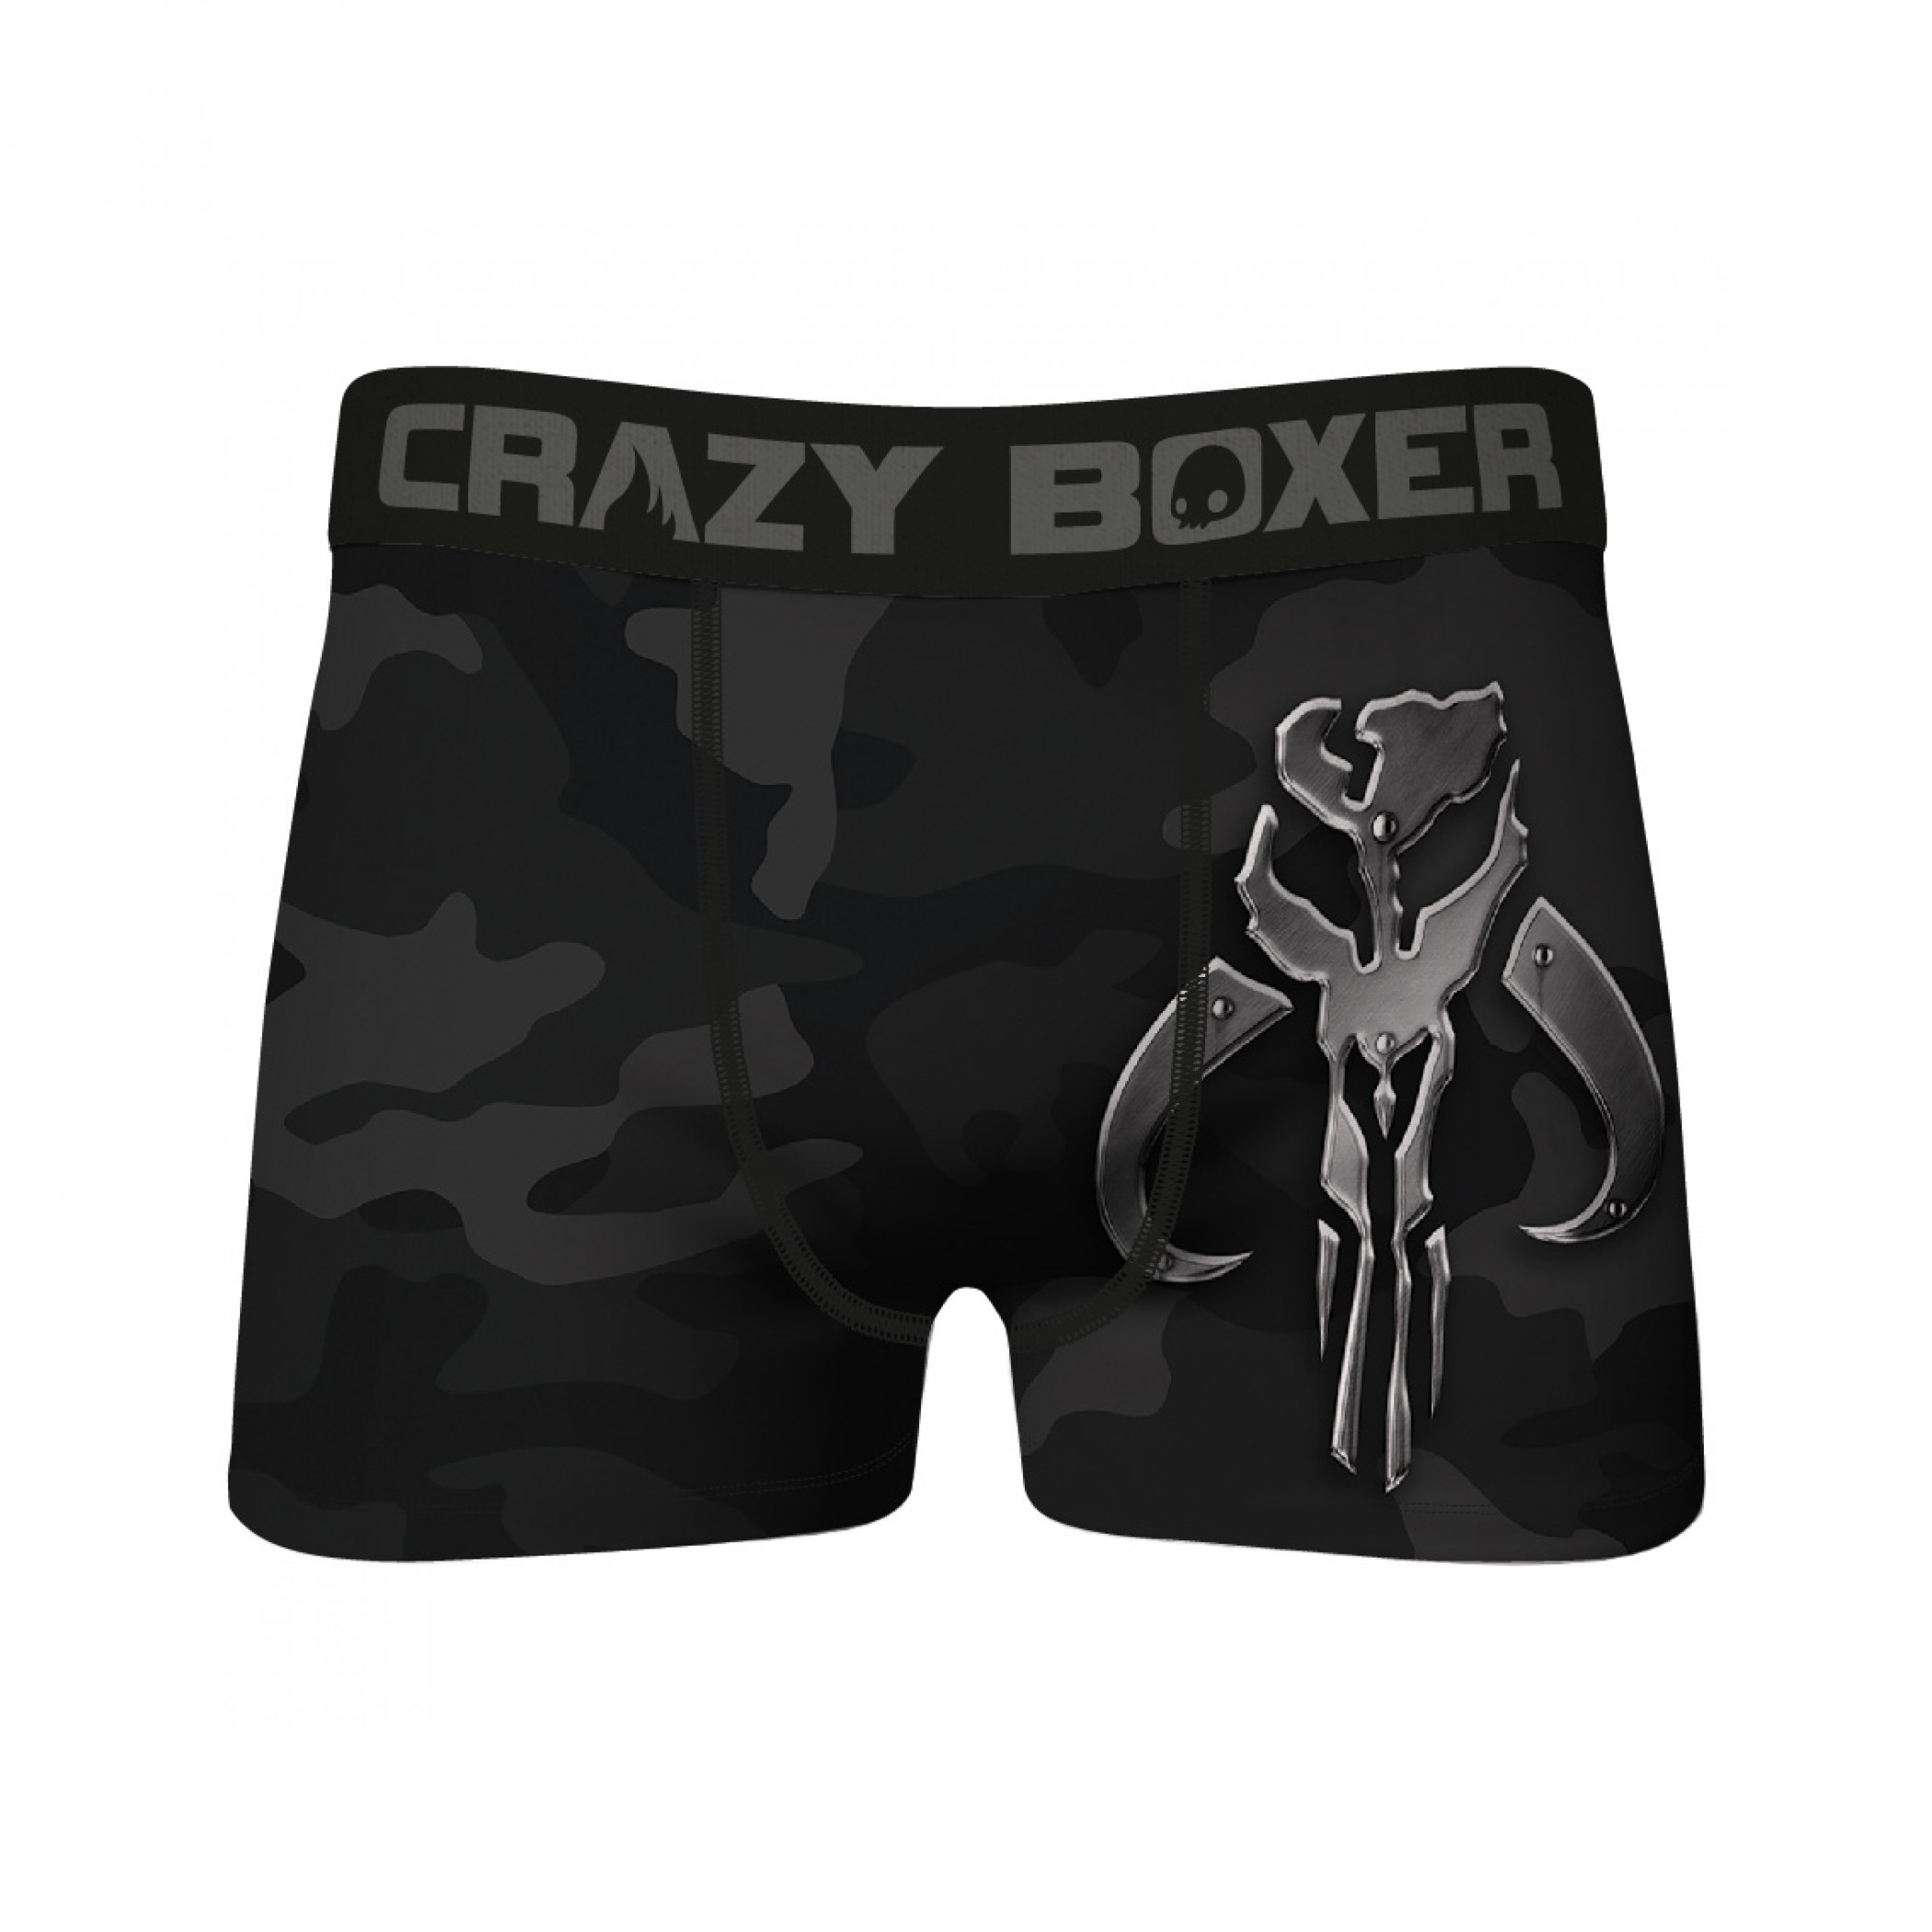 Star Wars The Mandalorian Symbol and The Child Waltzing Up 2-Pack of Crazy Boxer Briefs